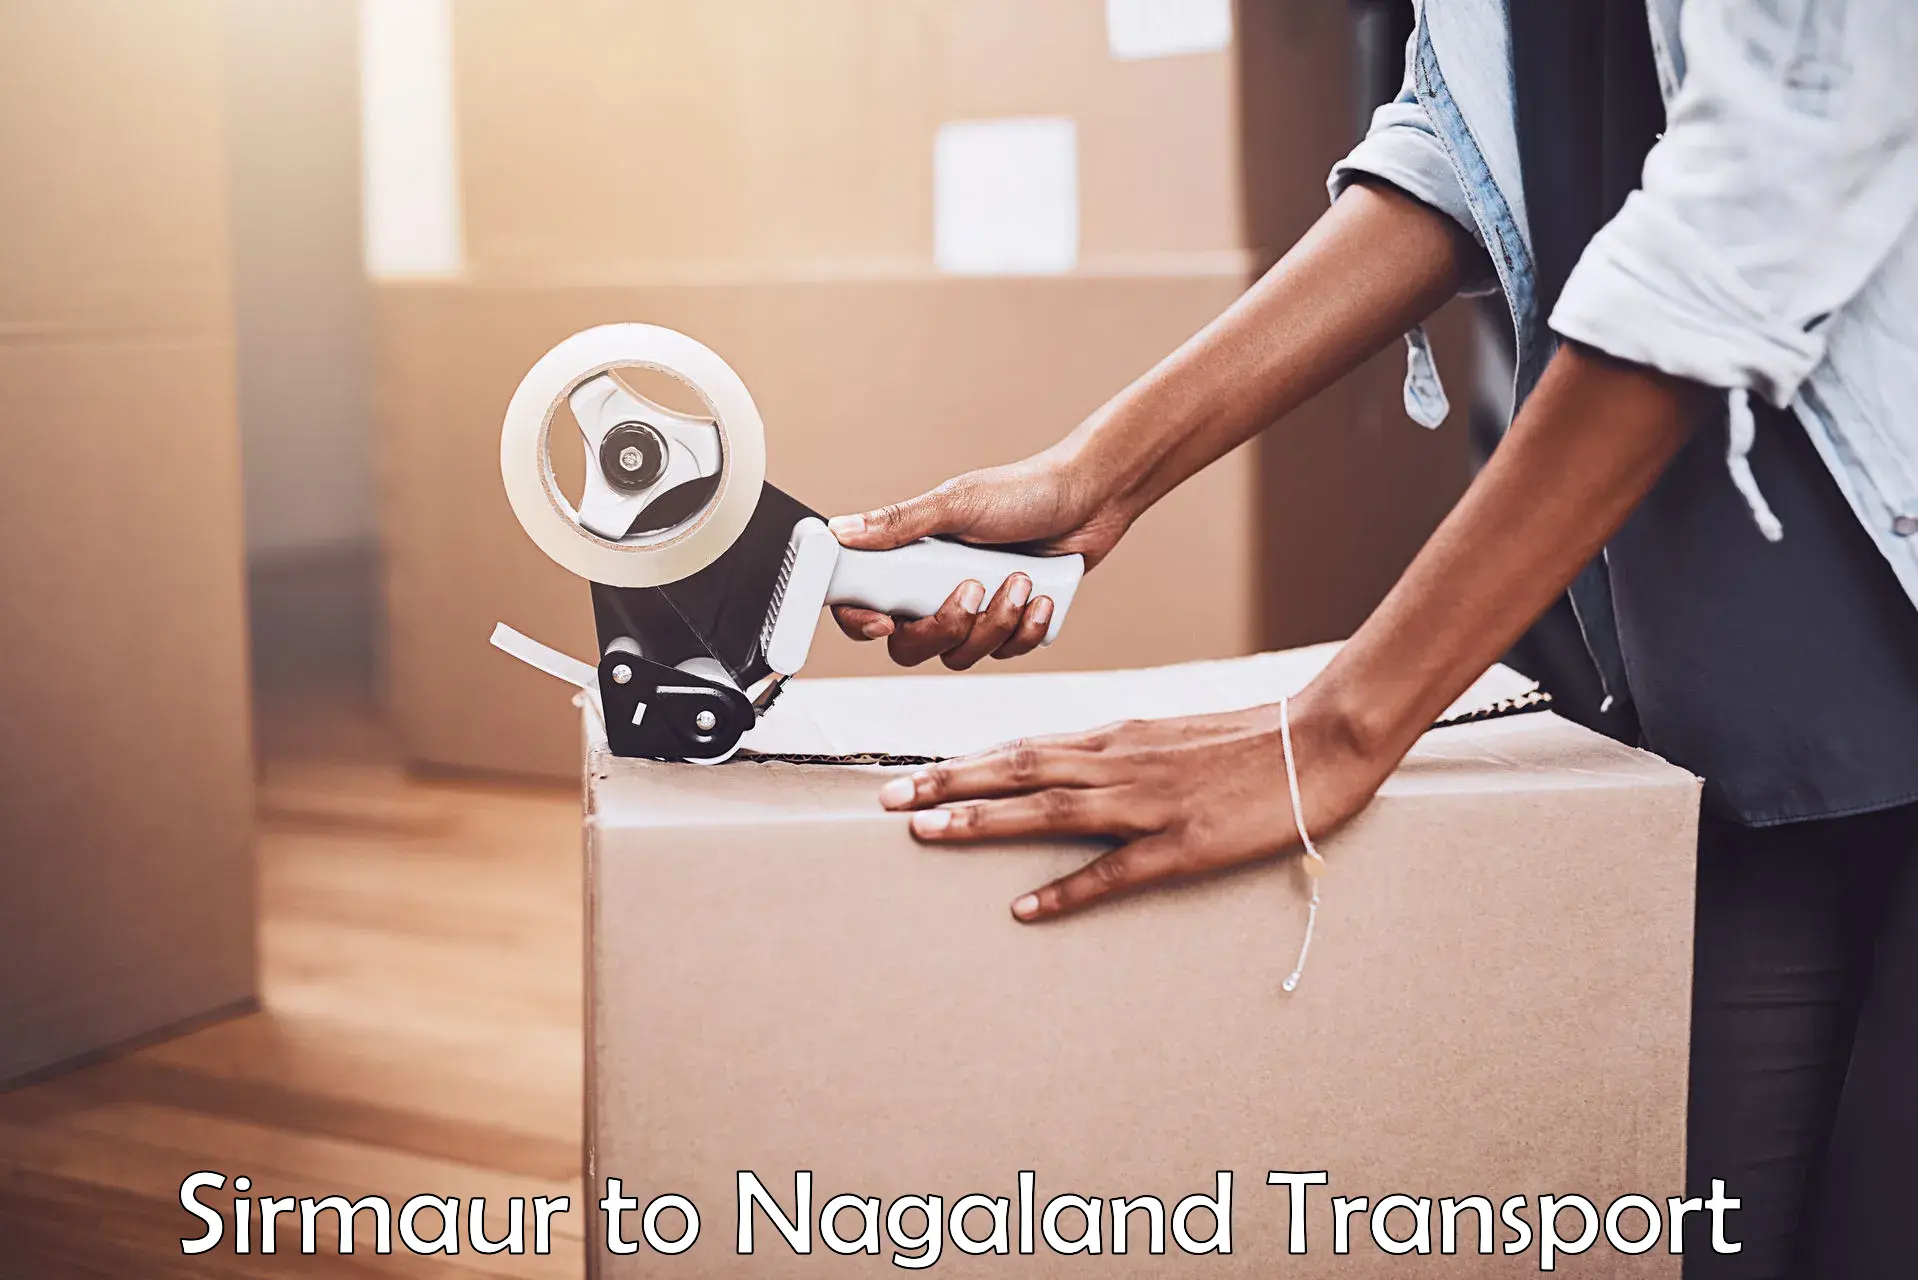 Container transport service Sirmaur to Dimapur